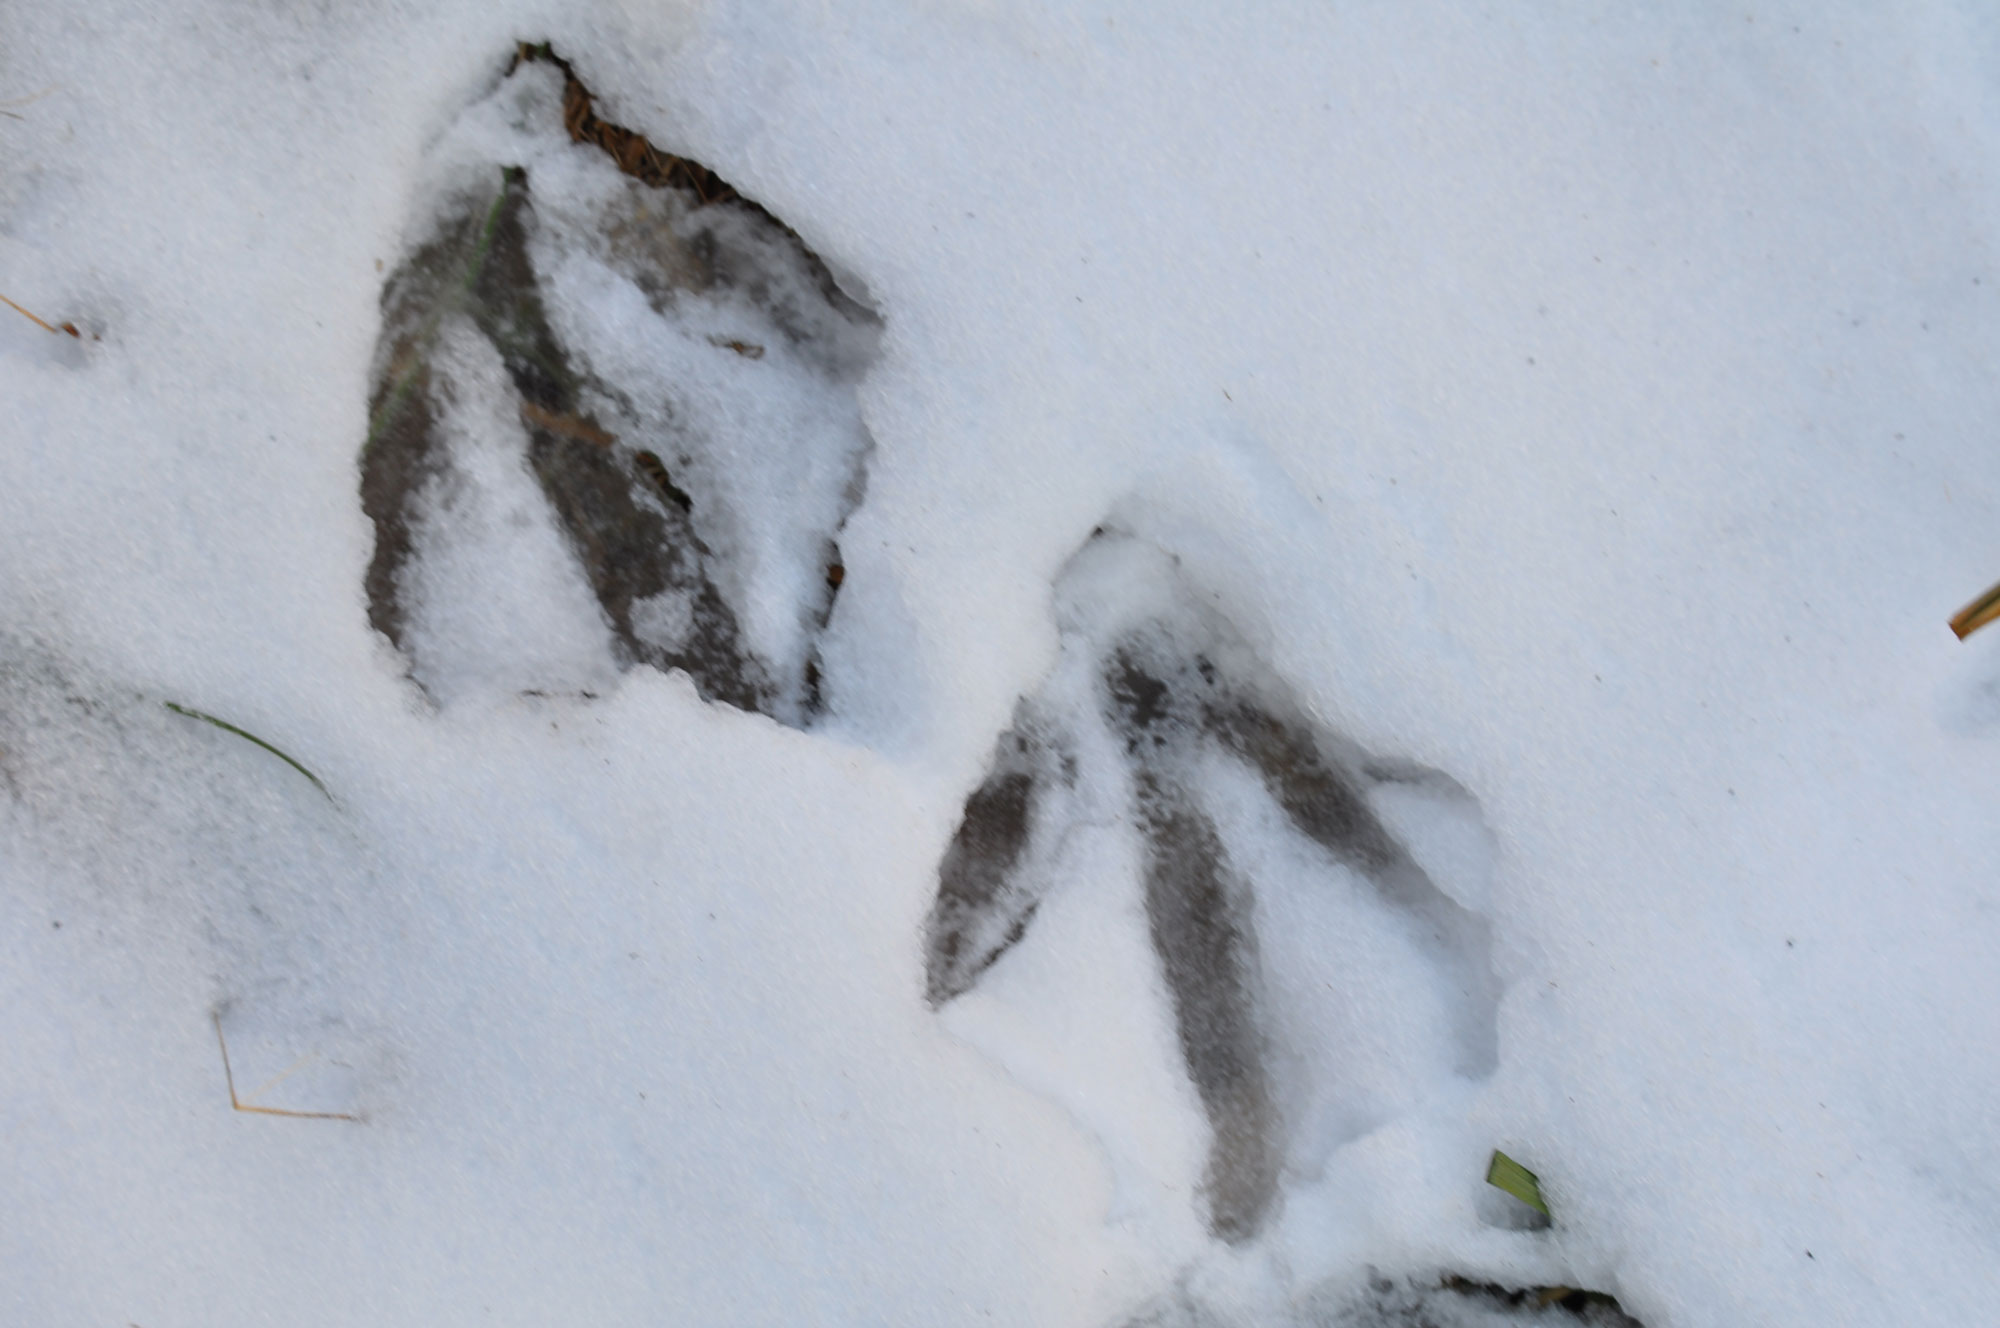 Great blue heron tracks in the snow.